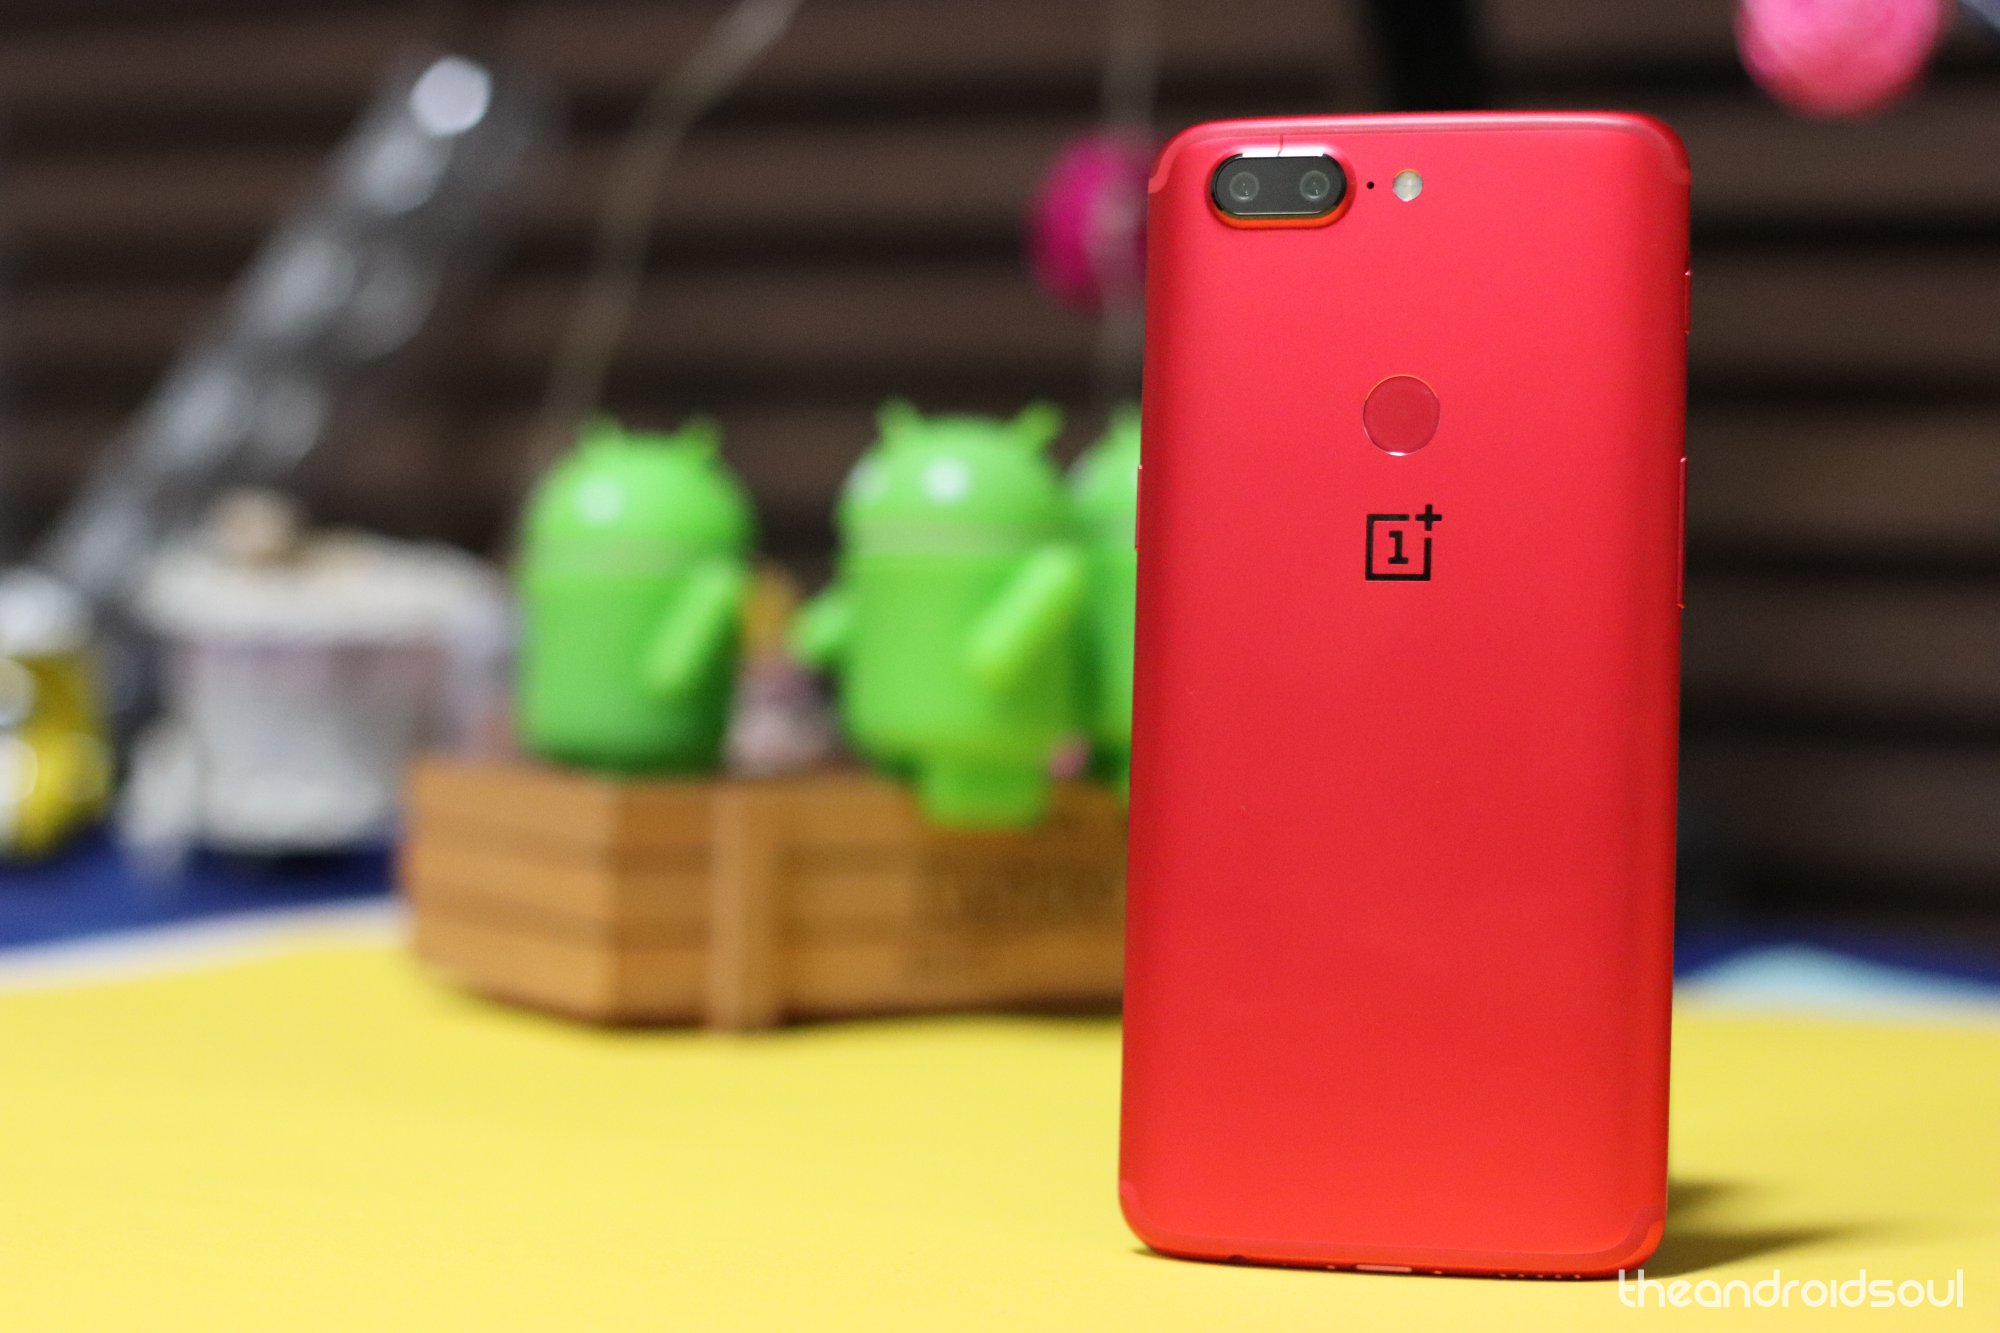 OnePlus 5T mobile phone